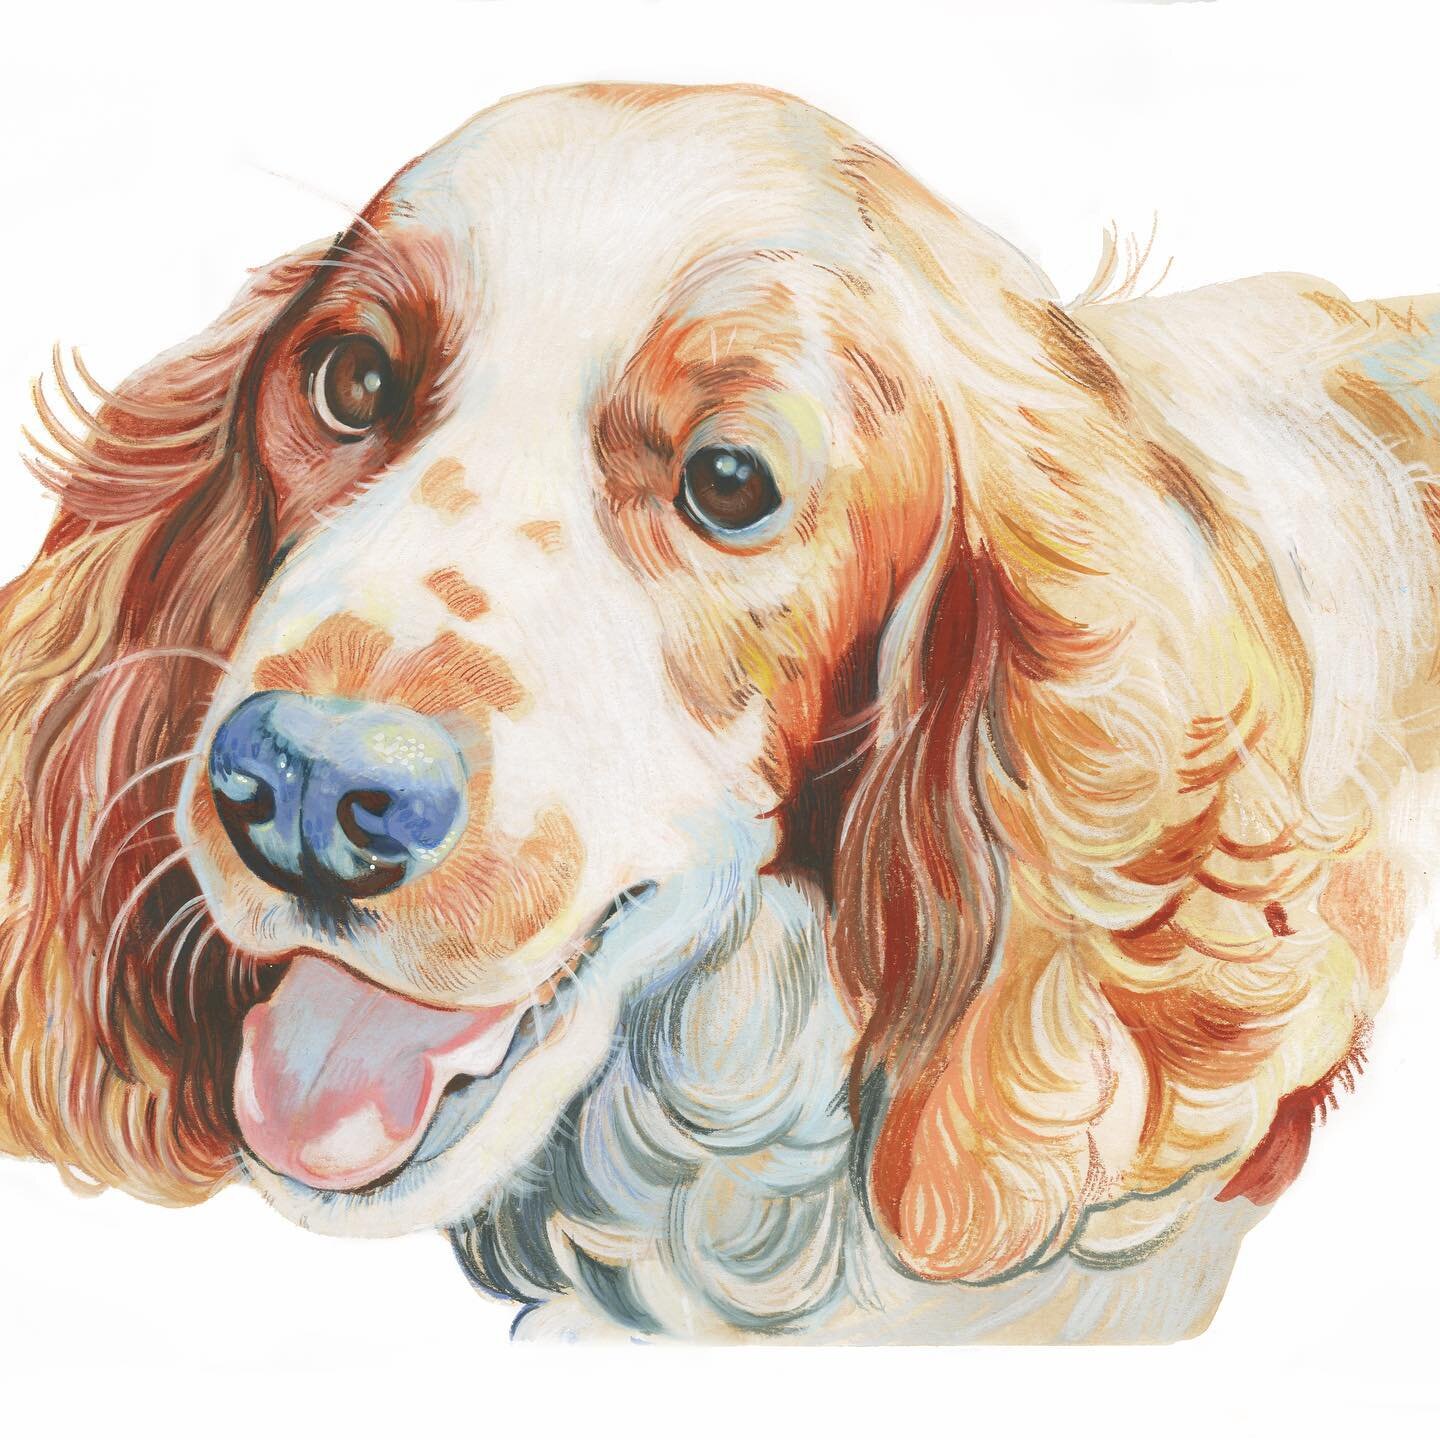 This is Alfie - The Welsh Springer 💕 

He was a Christmas present for the family this year, really enjoyed making it, and I&rsquo;m going to be setting up pet portrait commissions this year - let me know if you&rsquo;re interested and I&rsquo;ll be 